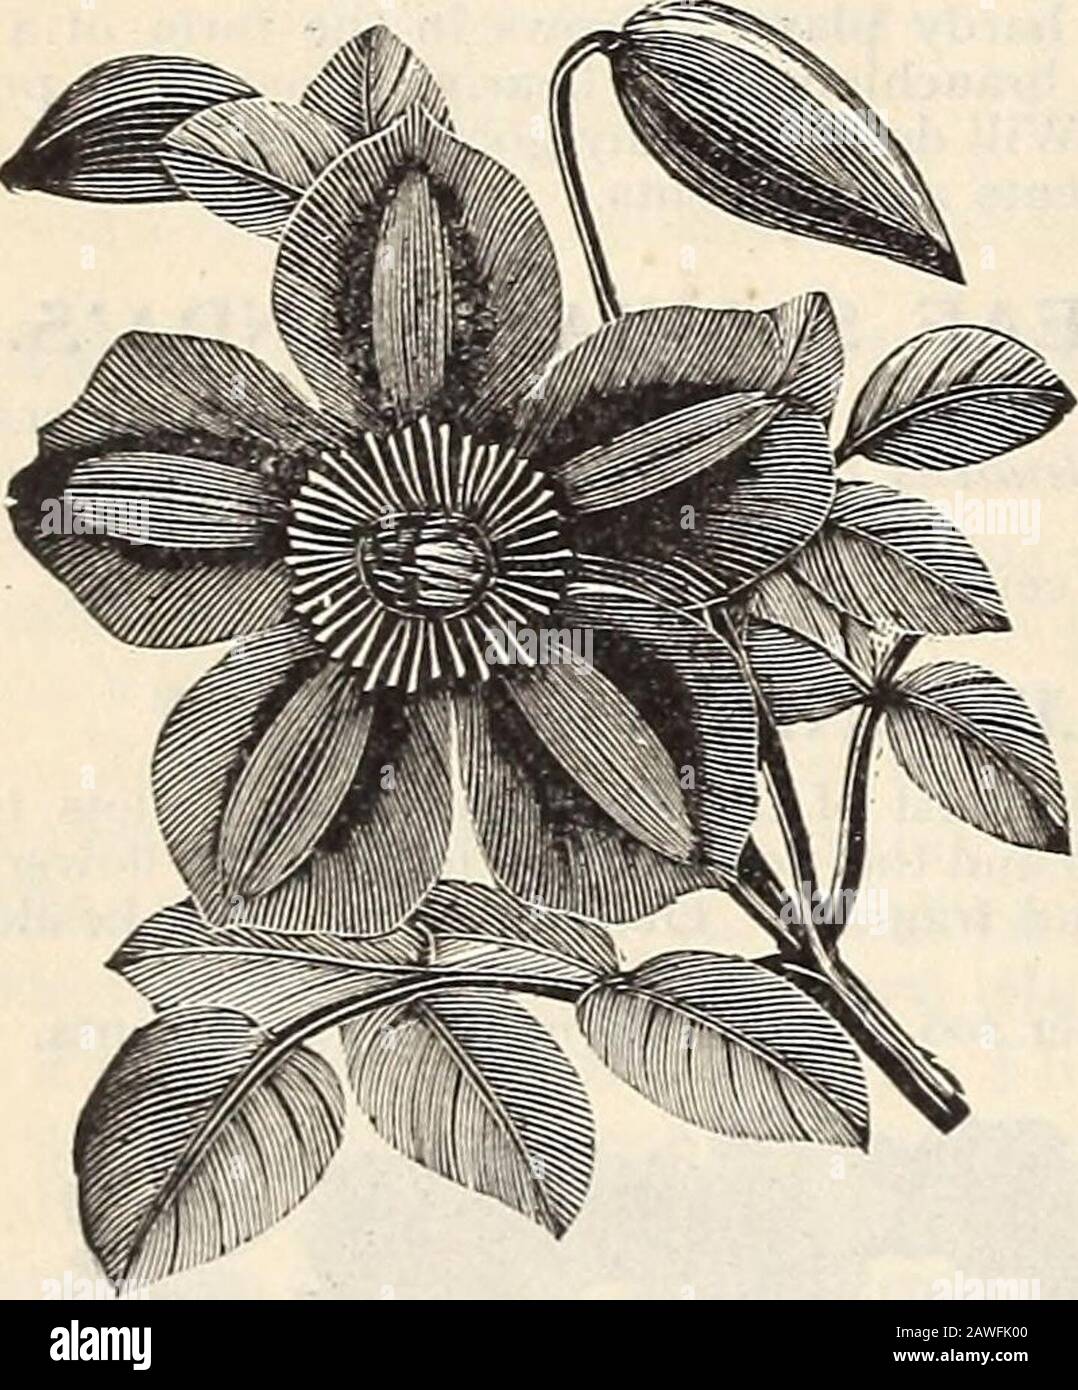 R& JFarquhar and Co'scatalogue, 1897 : reliable tested seeds plants, bulbs fertilizers tools, etc. . CLEMATIS iWICLLATA. of climbing plants; purple. Each, .50 to I.oo. CLEflATIS. of hardy, free-flowering climbers. Plants of our importation, A most beautiful clastrong and finely rooted. Paniculata. This lovely white variety, with its thousands of fleecy,small, star-like flowers, is one of the finest climbing plants known. Itbears so profusely and in such dense but airy clusters that the wholeplant appears as one mass of bloom with dark shining foliageenough only to give effect to its beauty. It Stock Photo